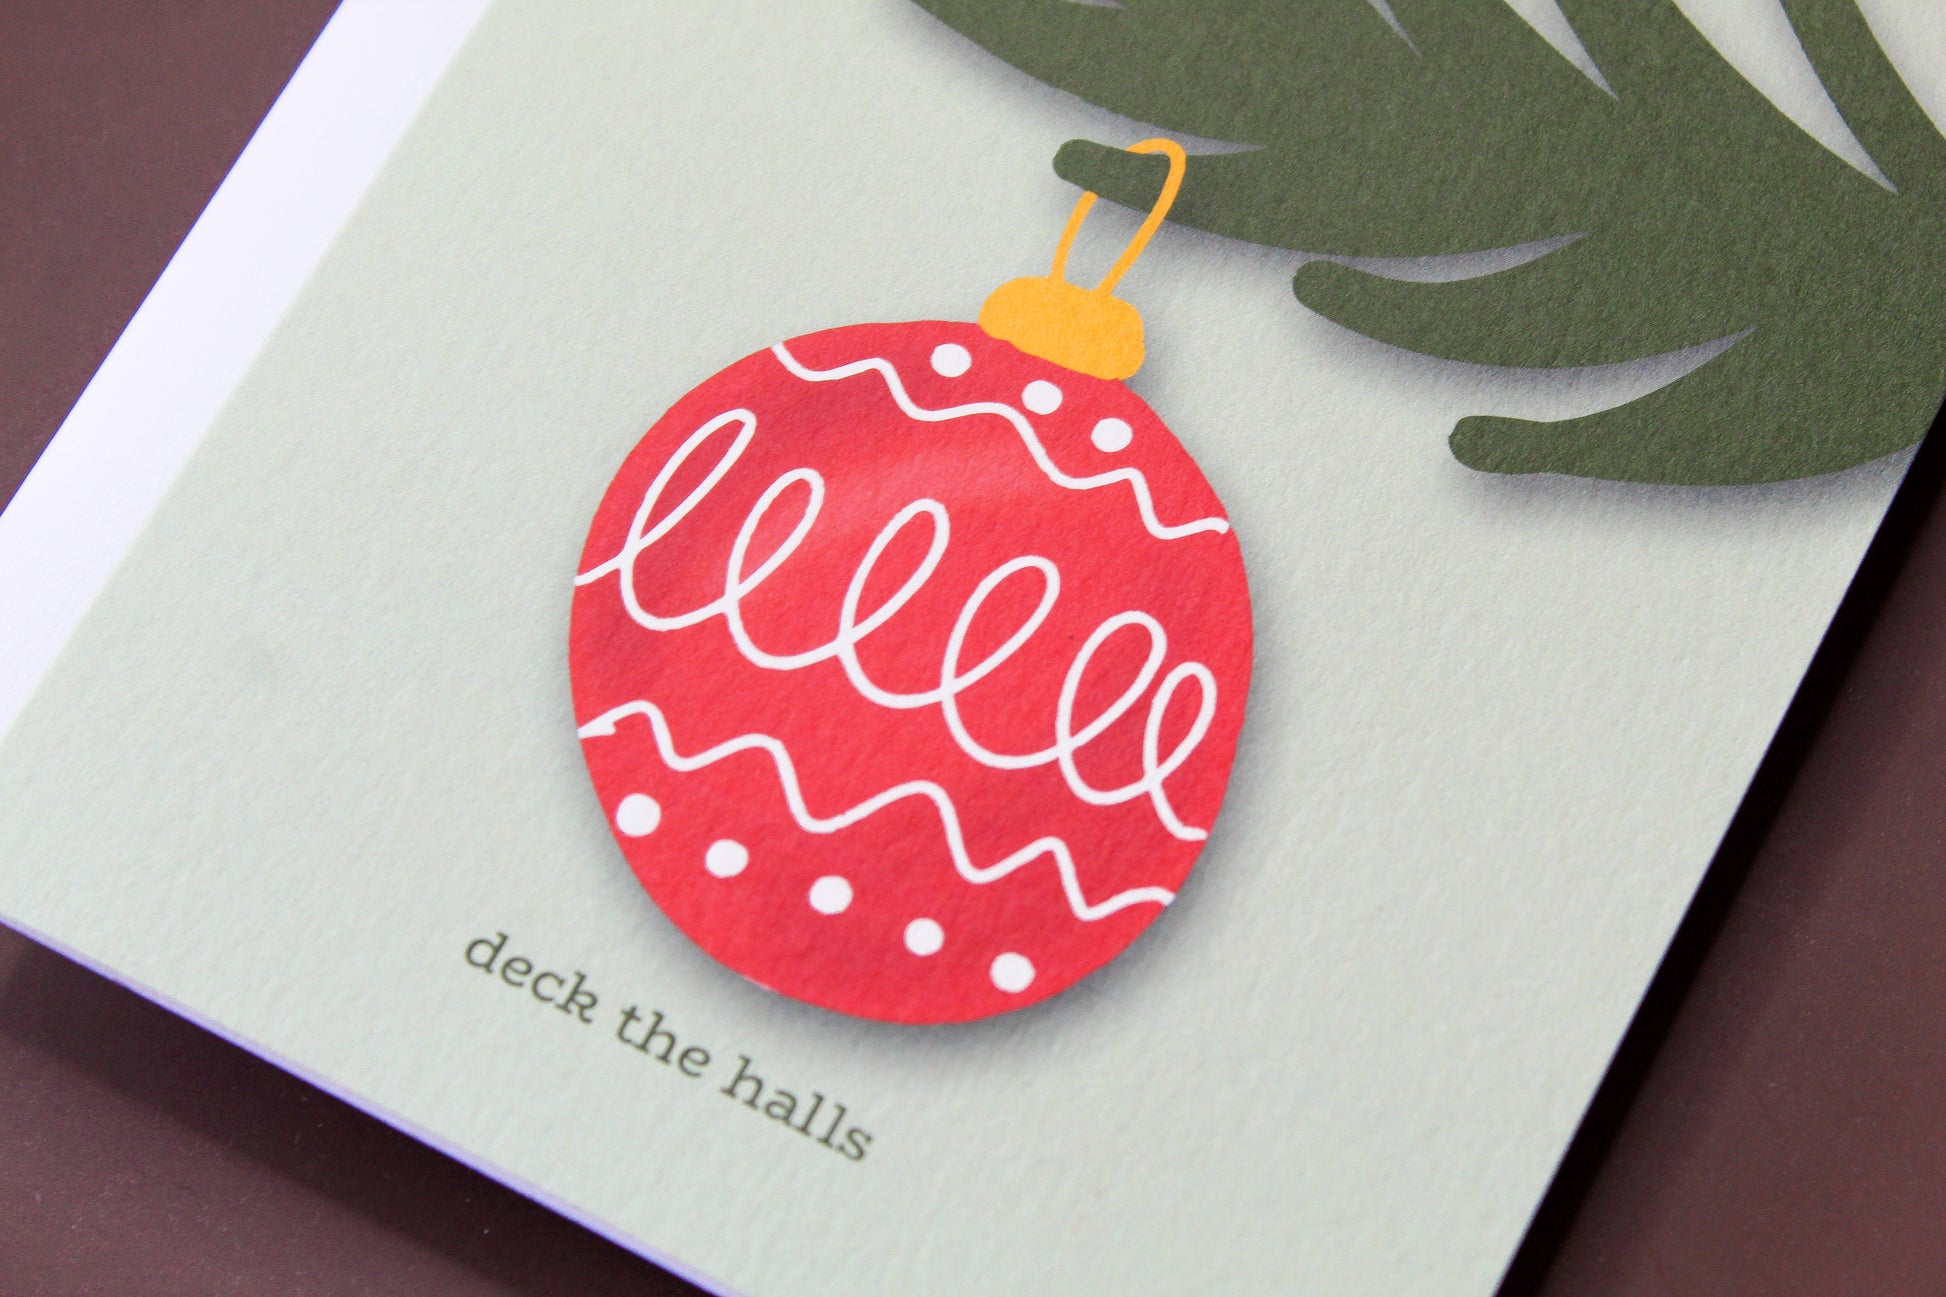 "Deck the Halls" Christmas Greeting spreads some holiday cheer with an illustrated vintage red Christmas ornament.